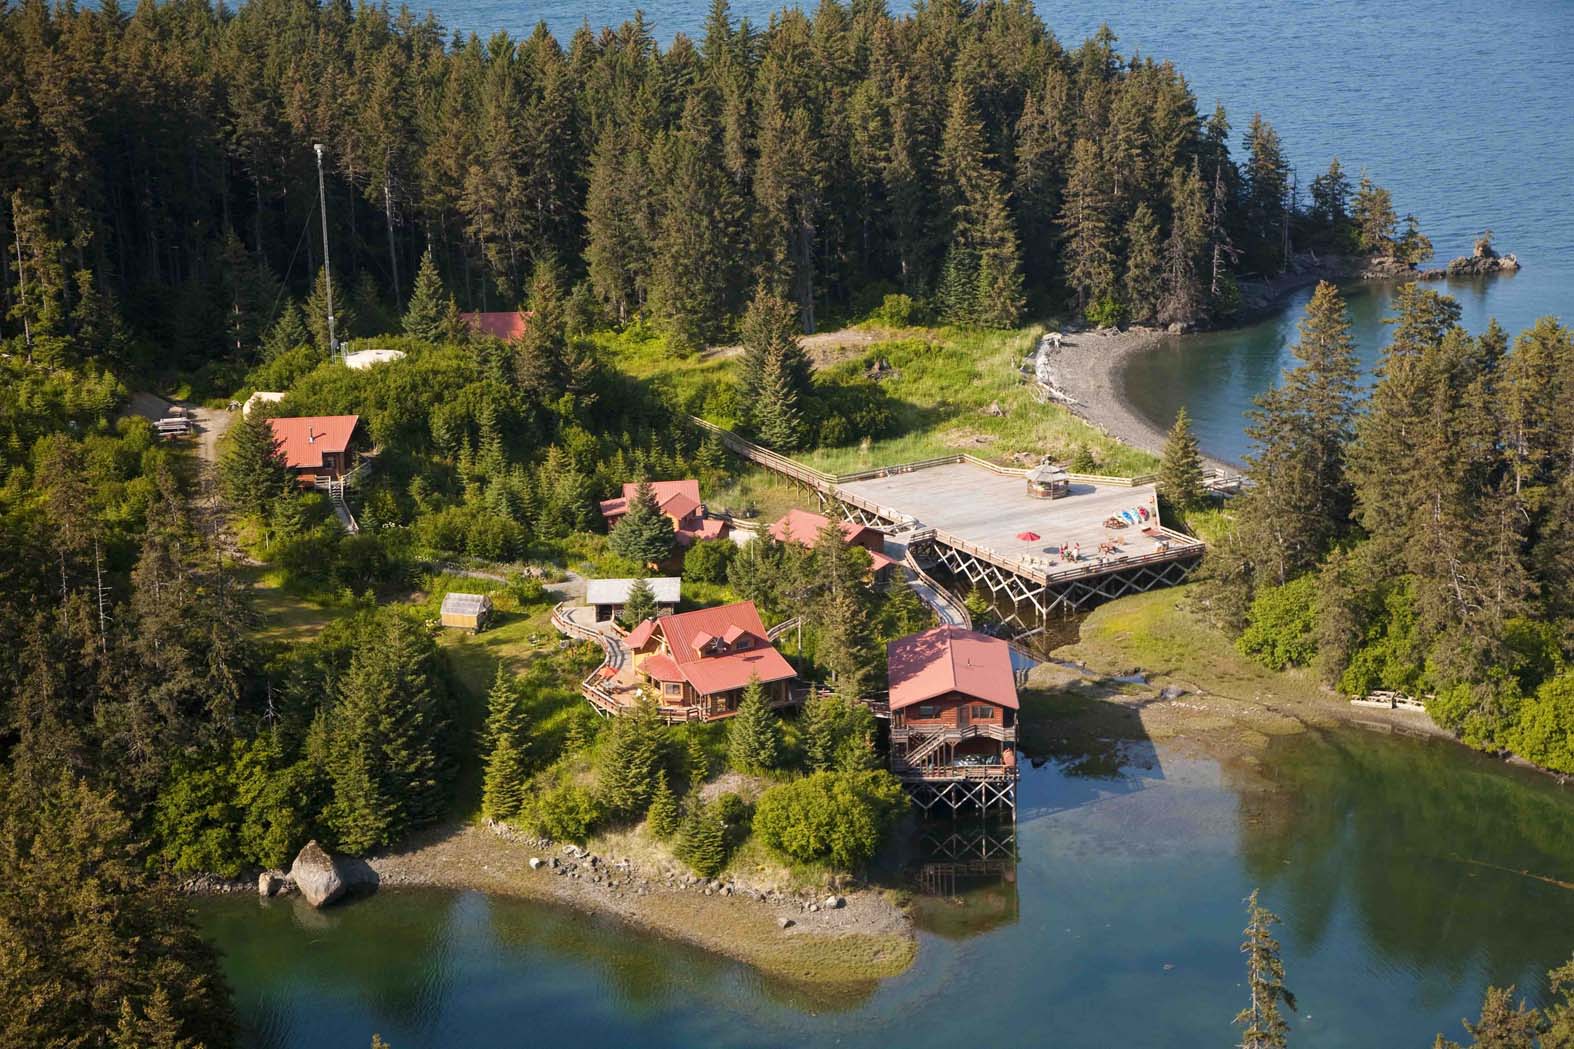 Tutka Bay Lodge has been recognized as a 2012 Fodor’s 100 Hotel Awards winner in the Trip of a Lifetime category.